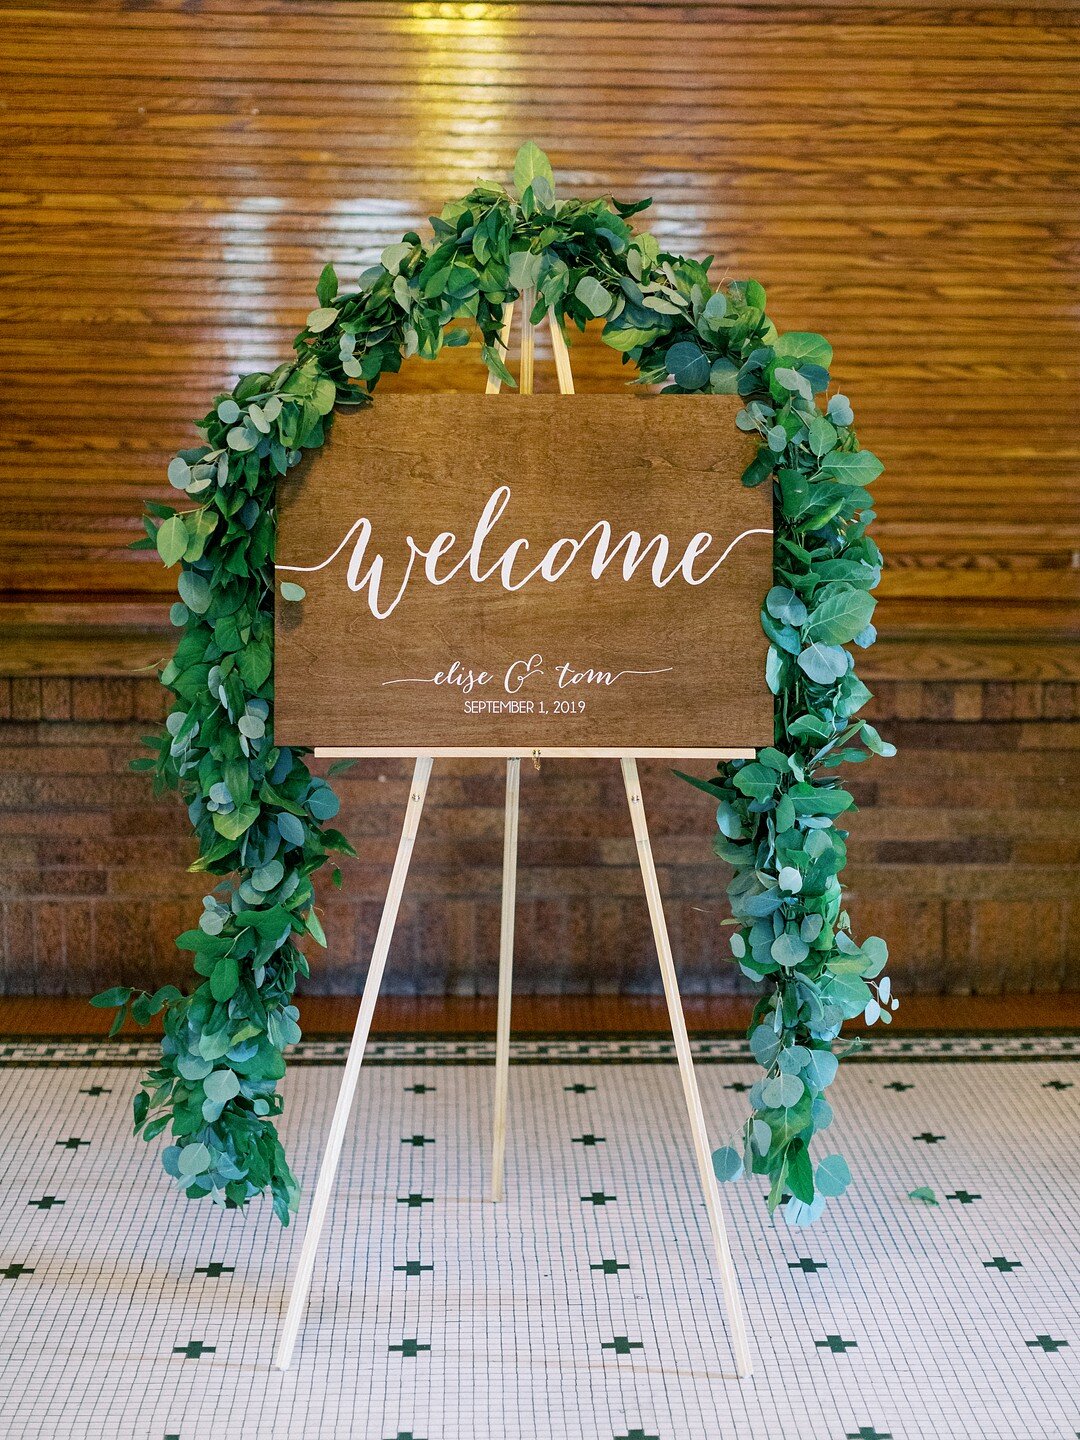 Wood Wedding Sign: Romantic Cafe Brauer Wedding captured by Kaity Brawley Photography featured on CHI thee WED